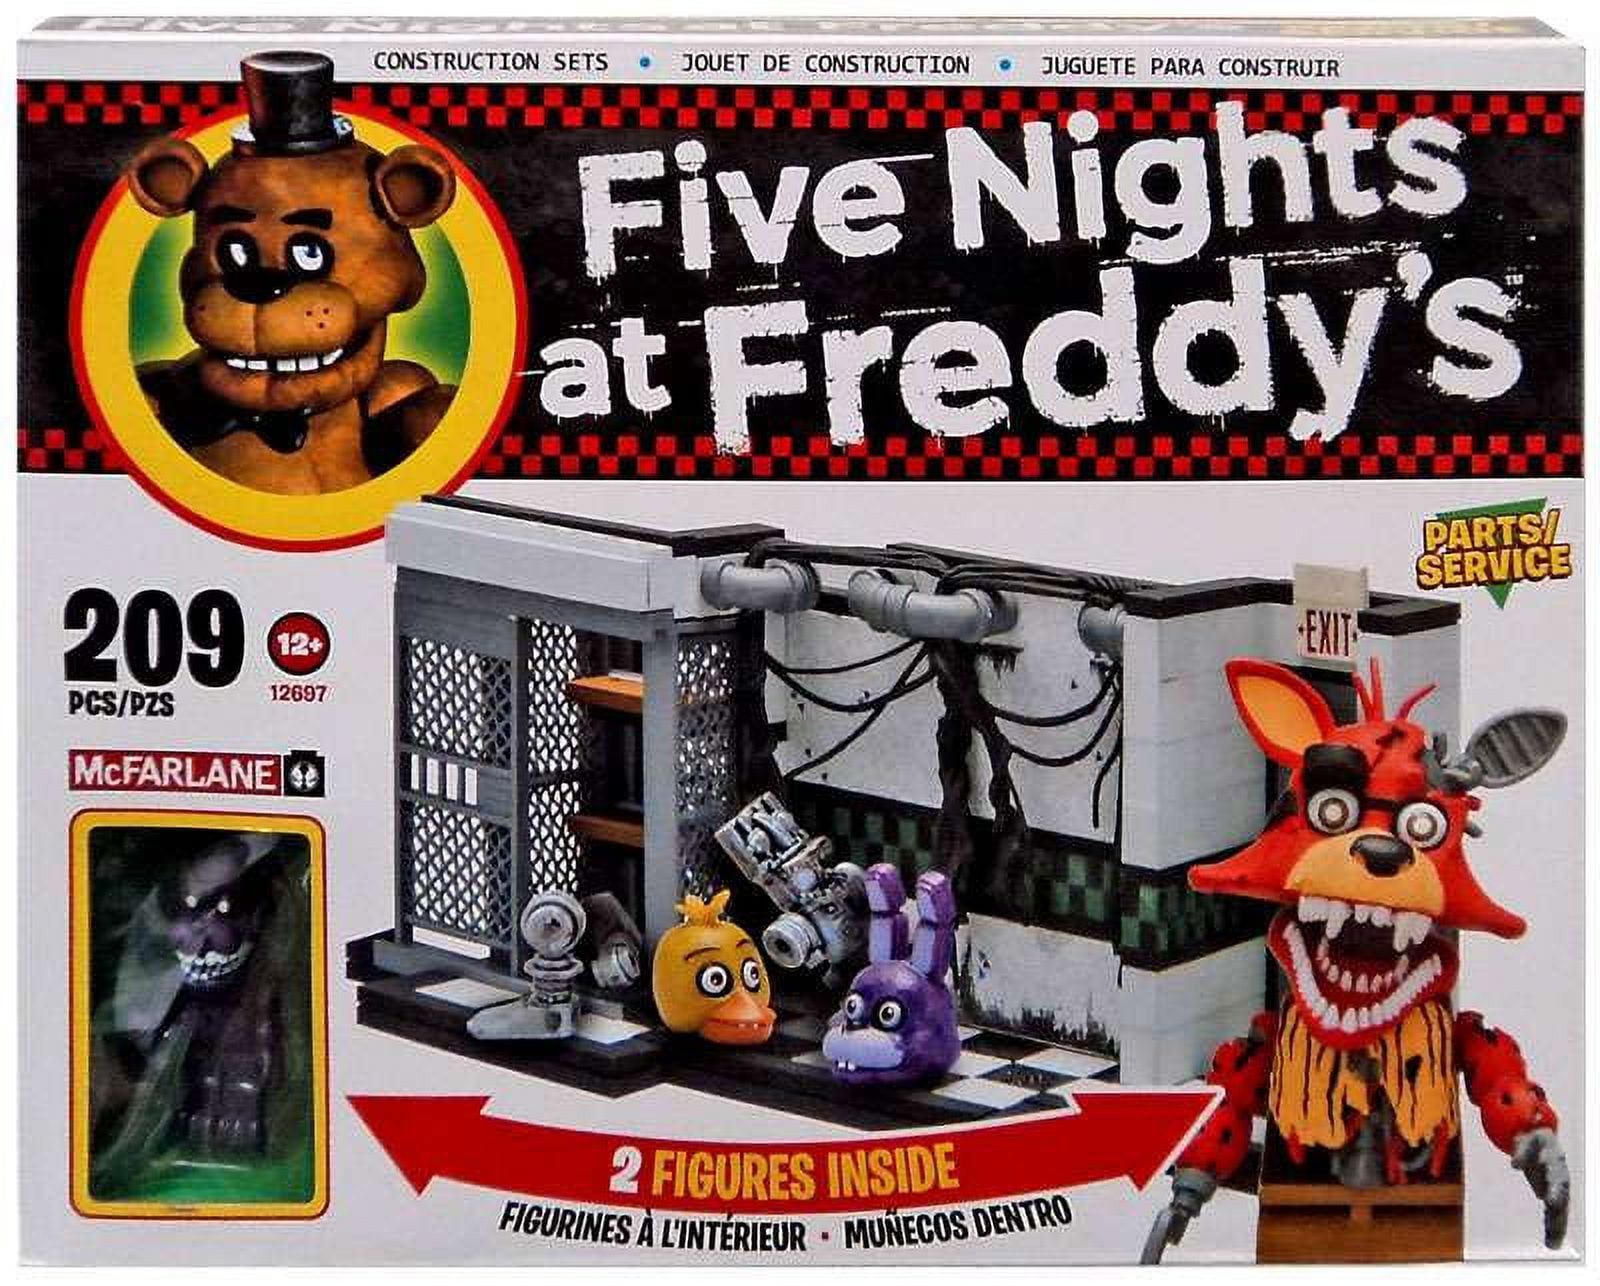 Five Nights at Freddy's MCS - Medium Sets 2 - Parts & Services Construction  Play Set , 209 Pieces 